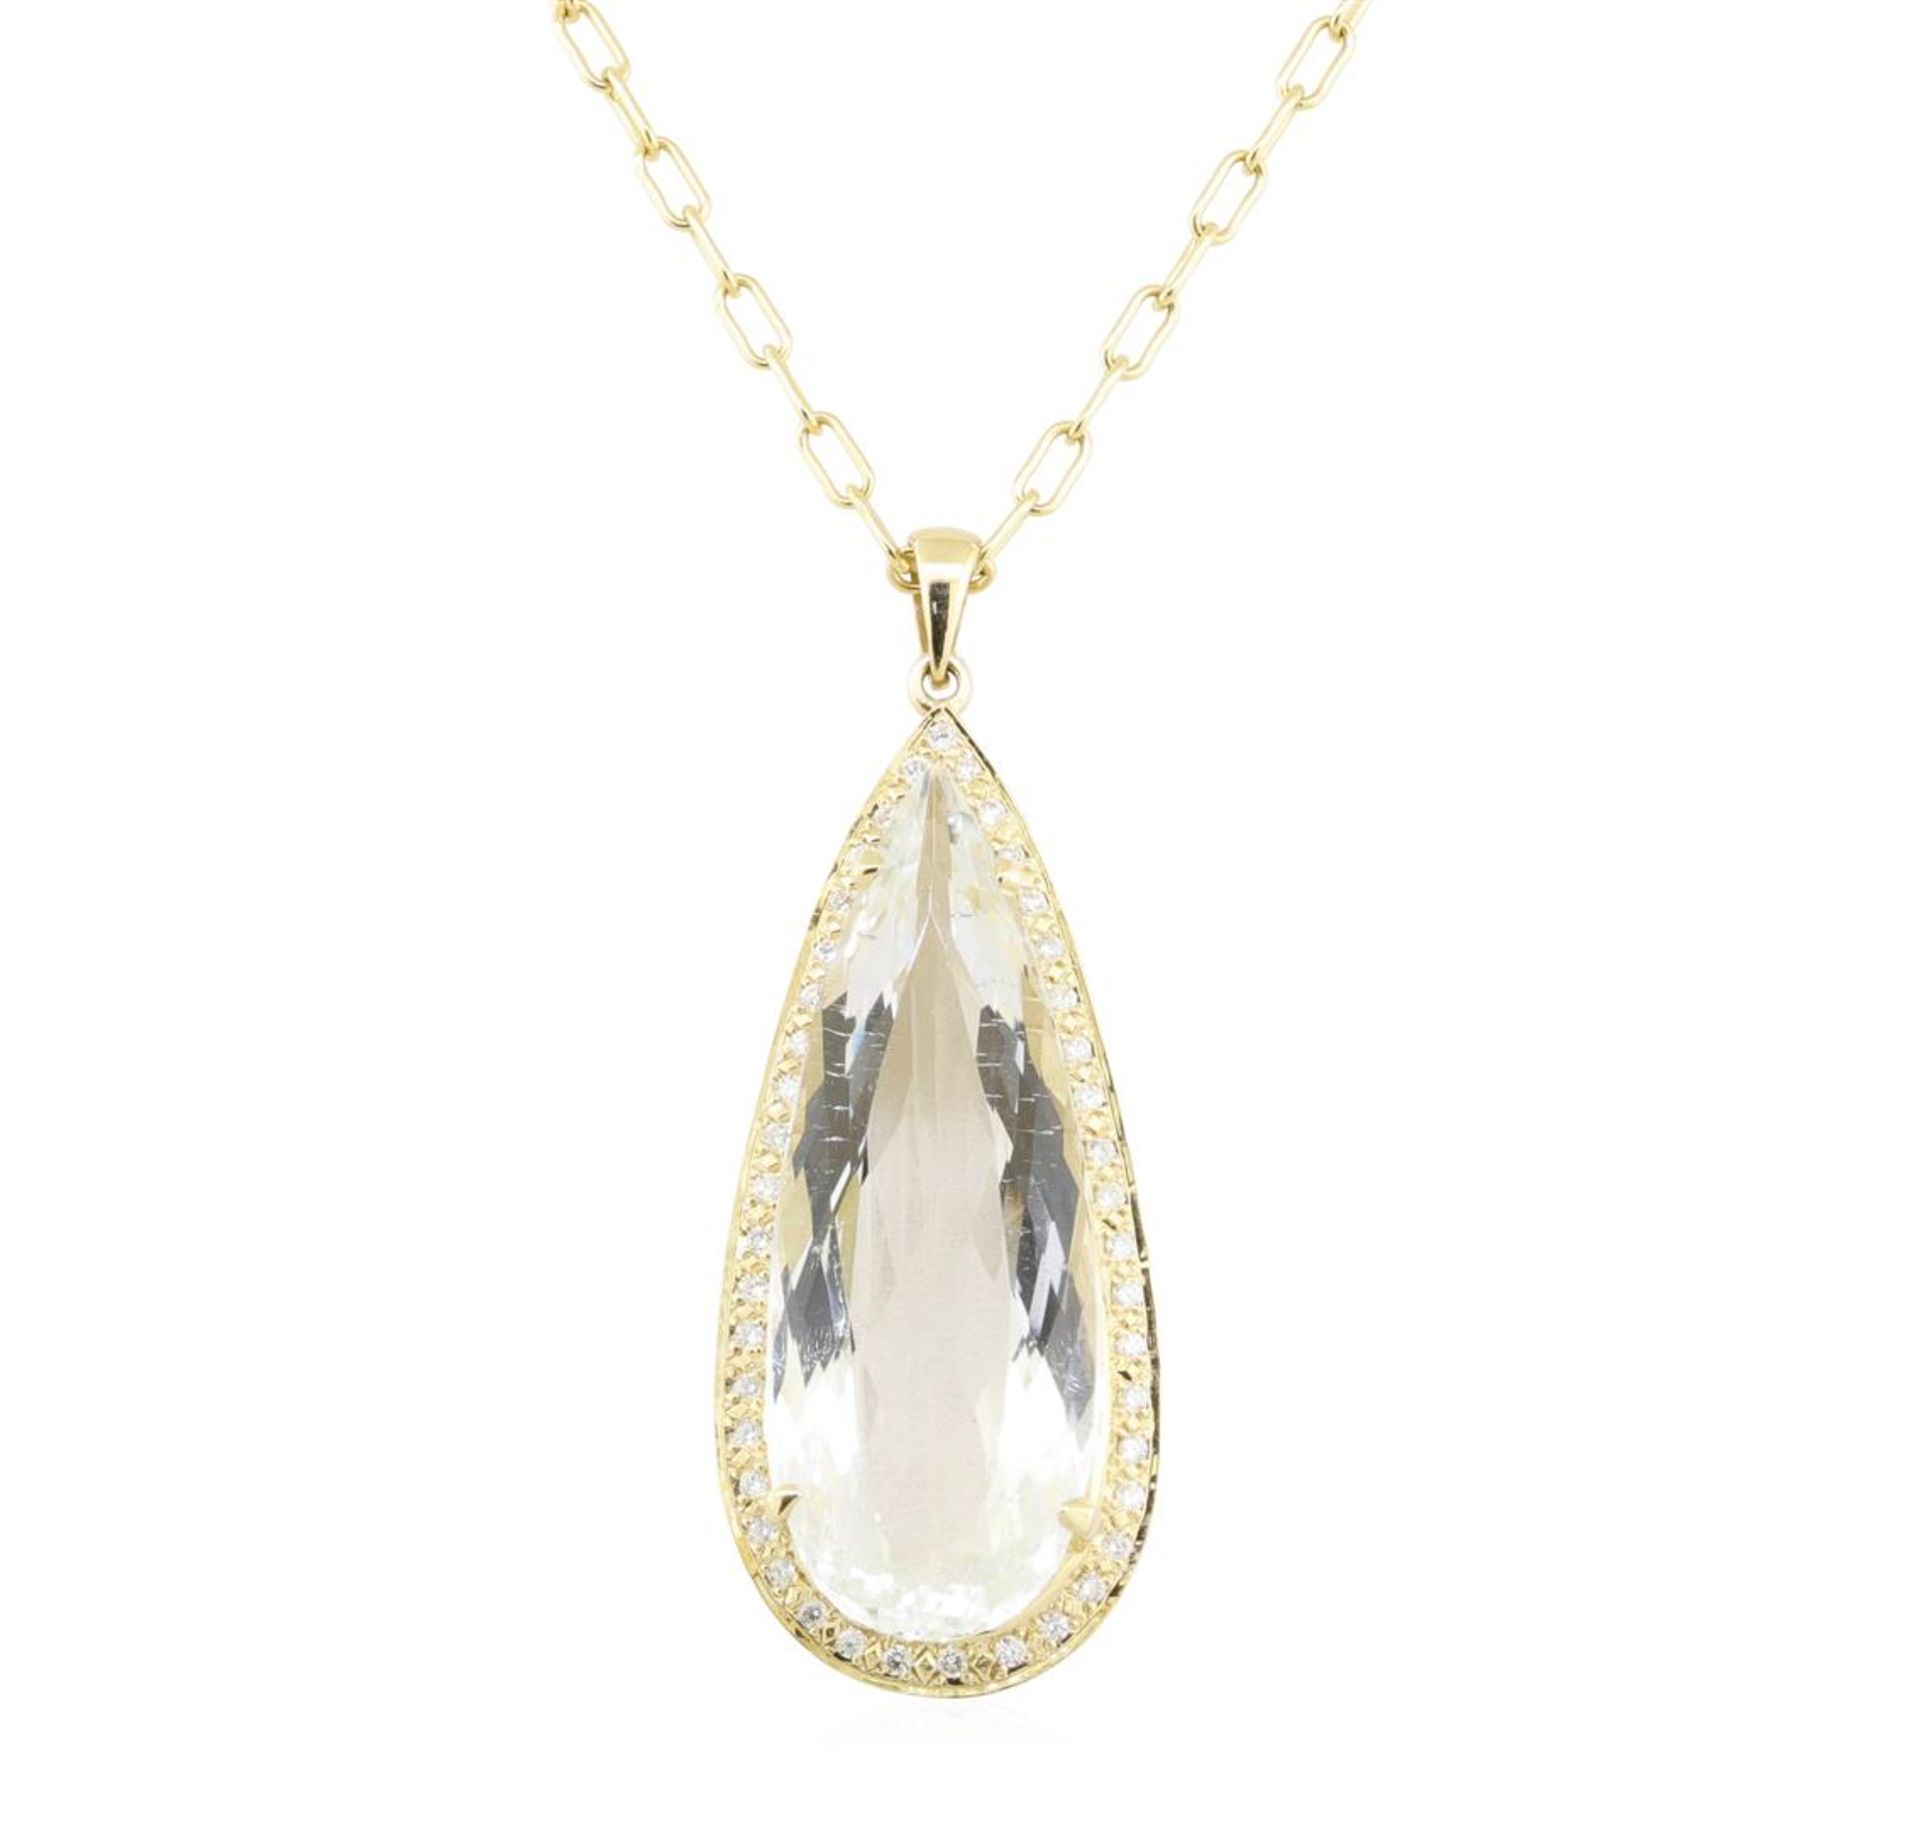 30.51 ctw Aquamarine and Diamond Pendant With Chain - 14KT Yellow Gold - Image 2 of 3